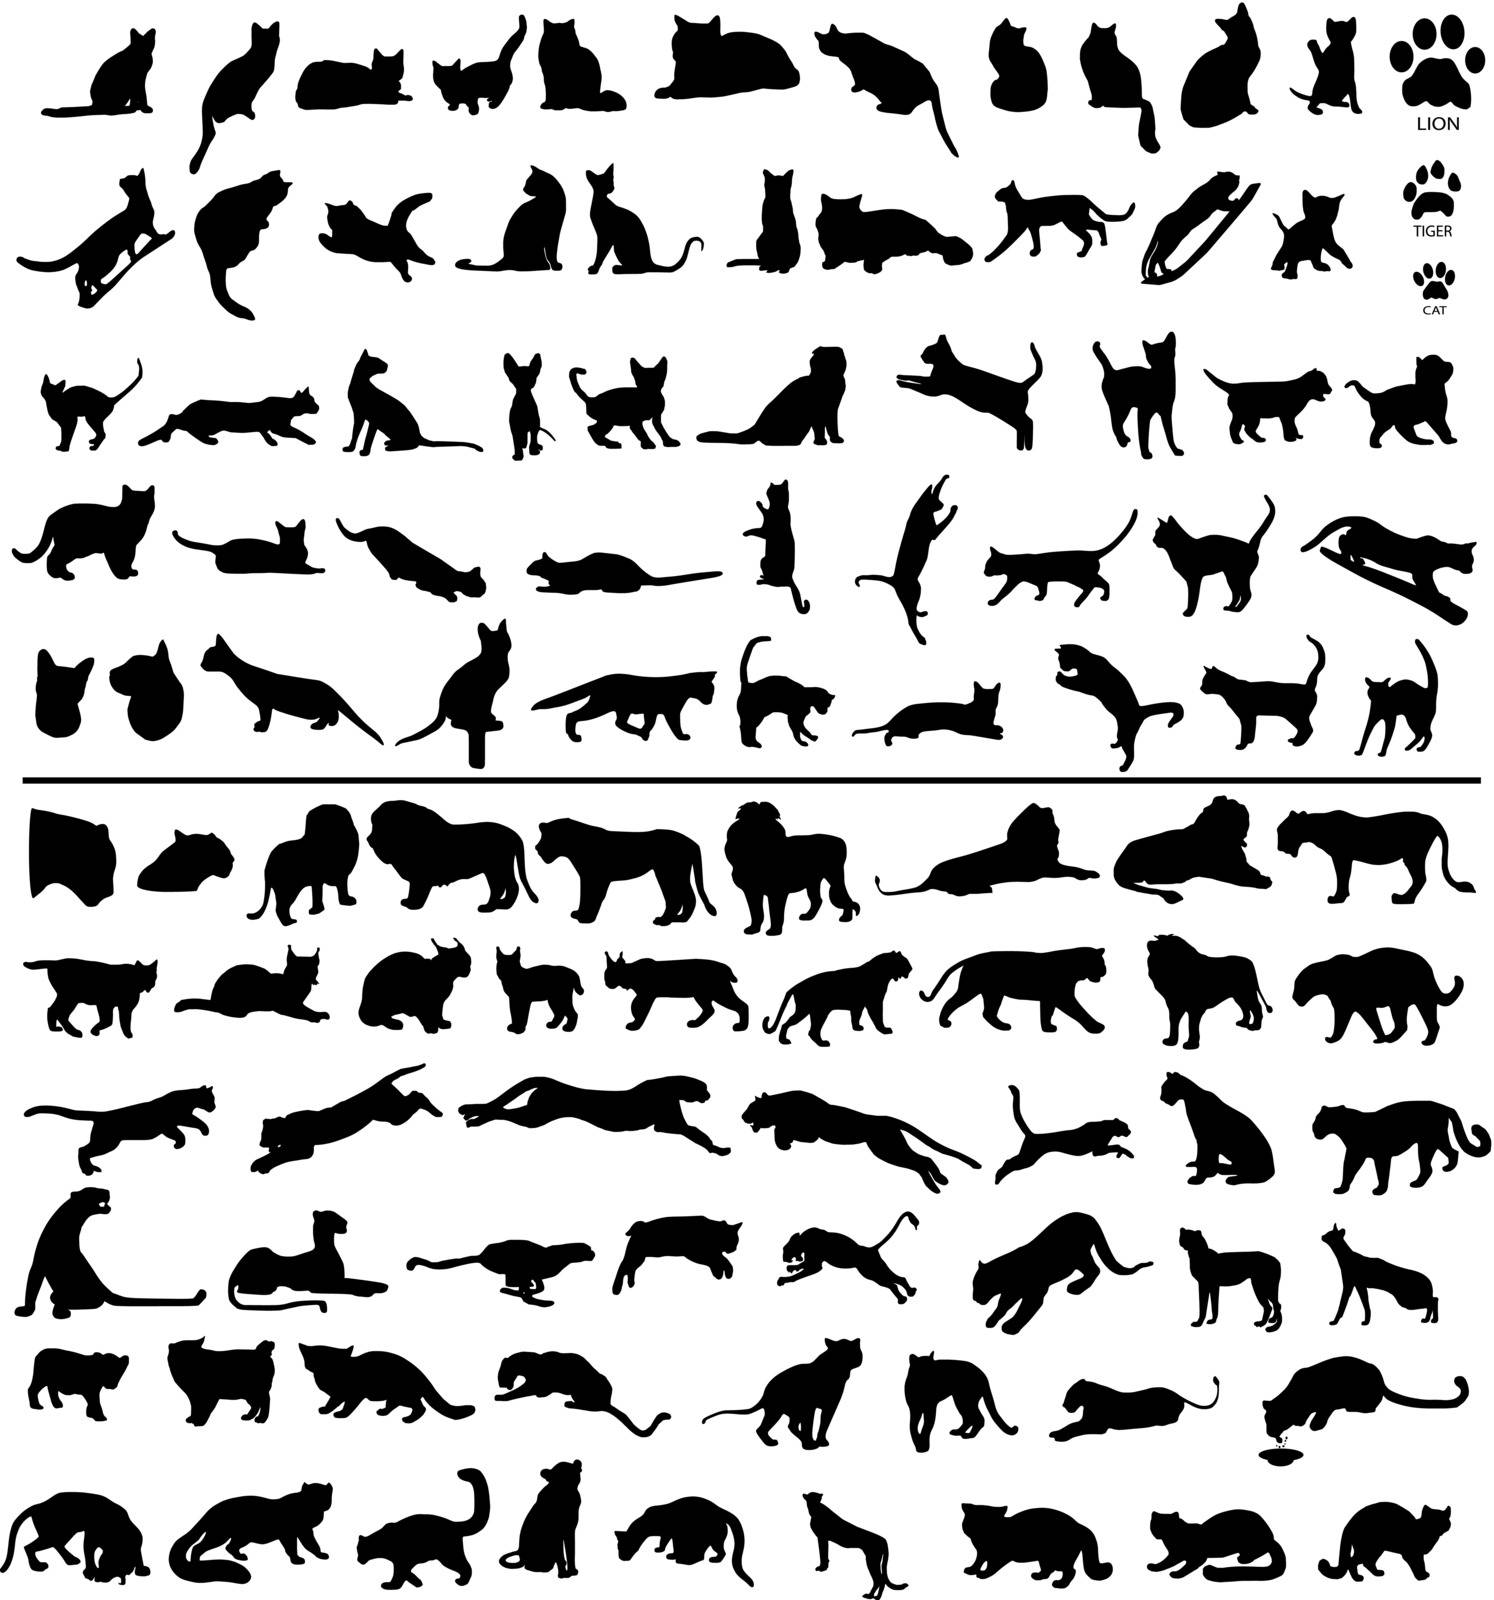 100 silhouettes of big and small cats